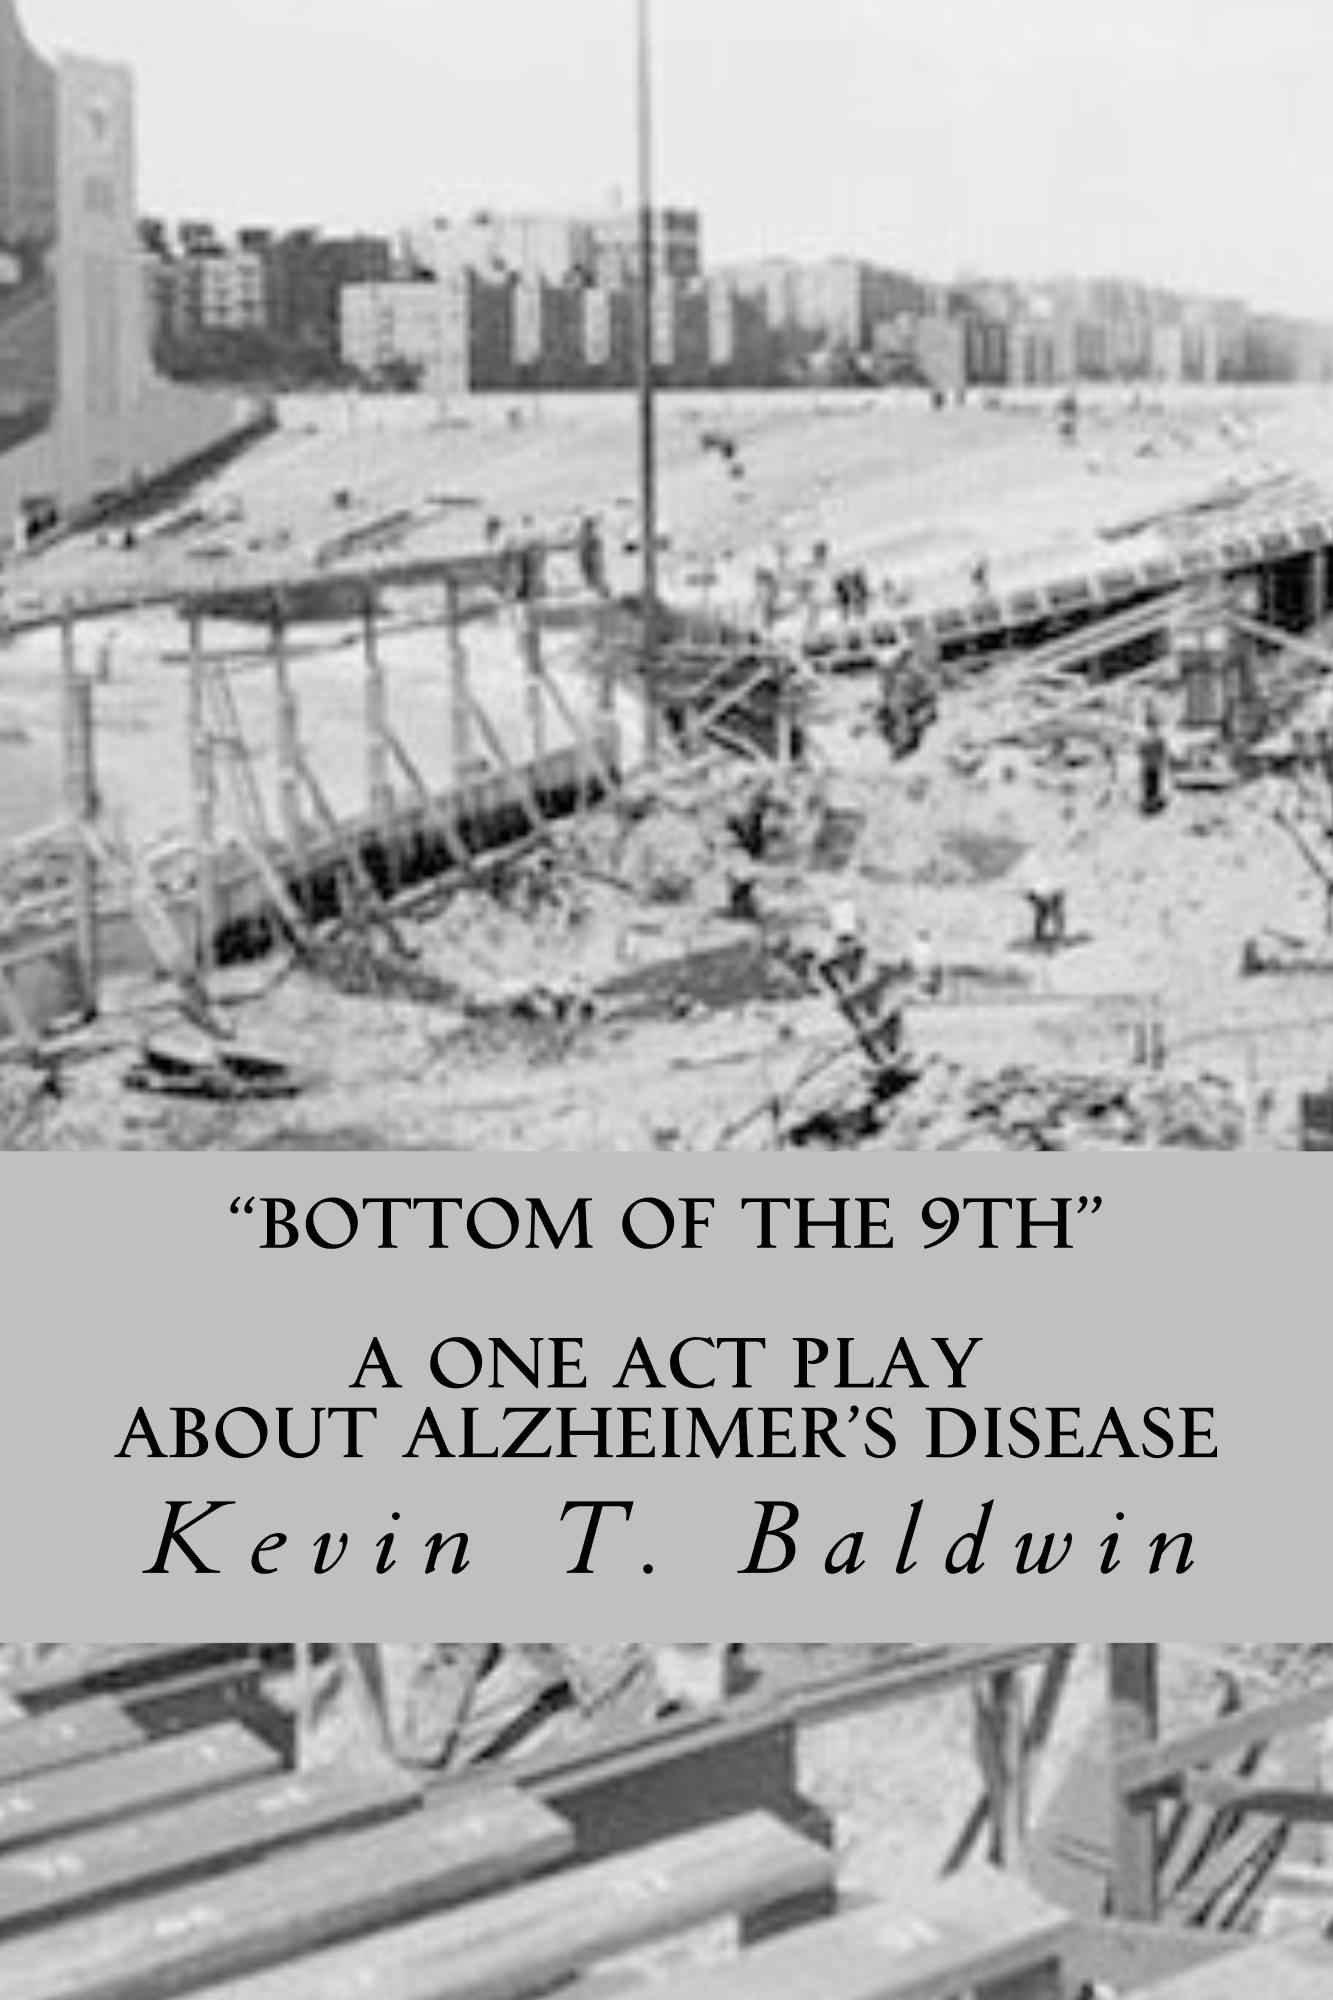 "Bottom of the 9th" – A One-Act Play about Alzheimer’s Disease